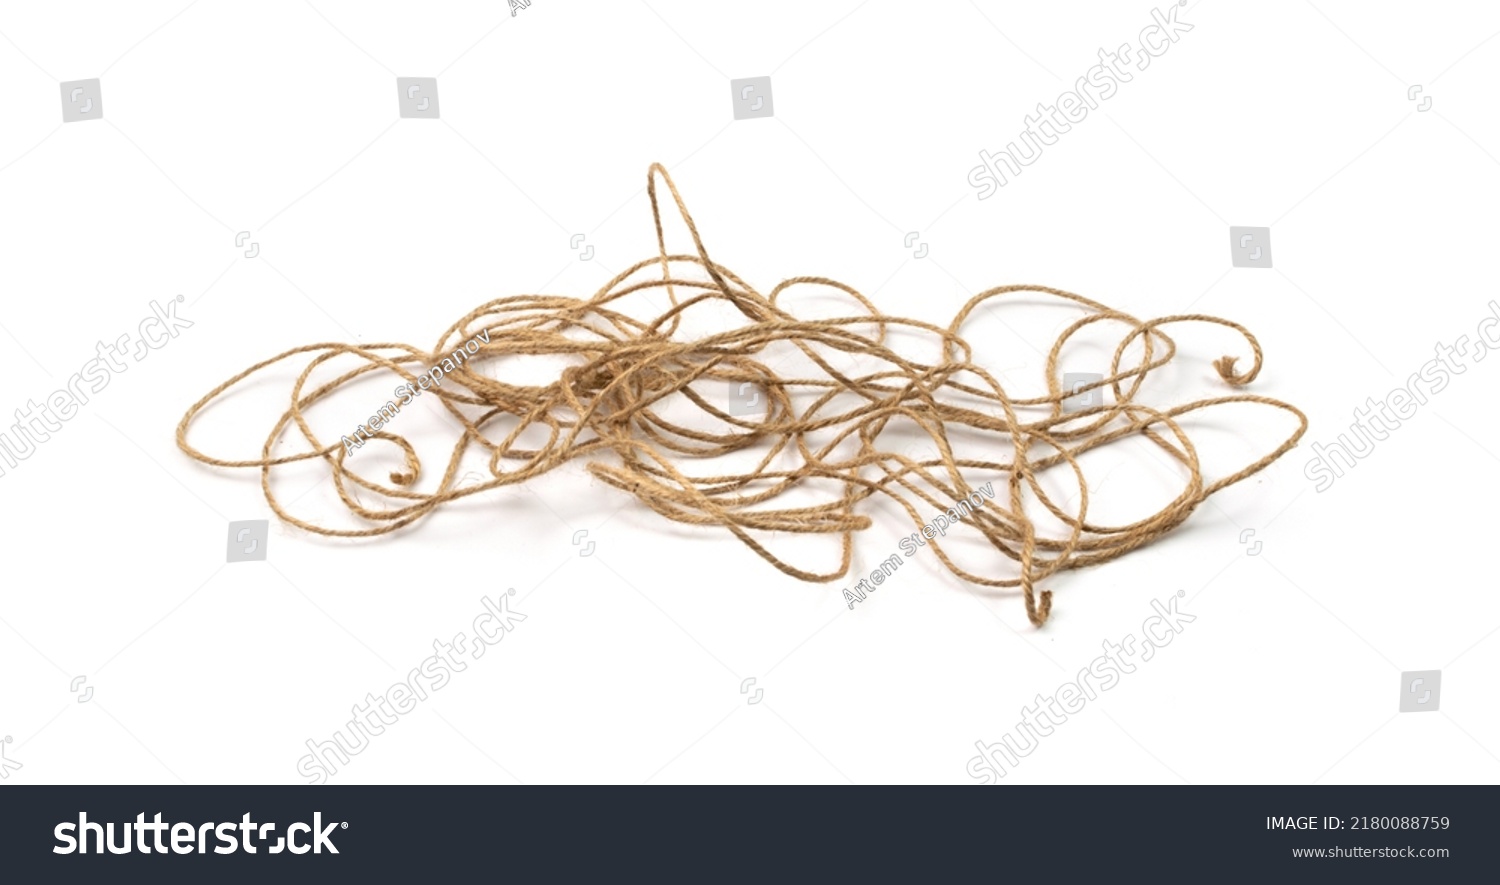 String tangled mess. Complex, confusion, chaos concept with yarn ball cord, rope #2180088759